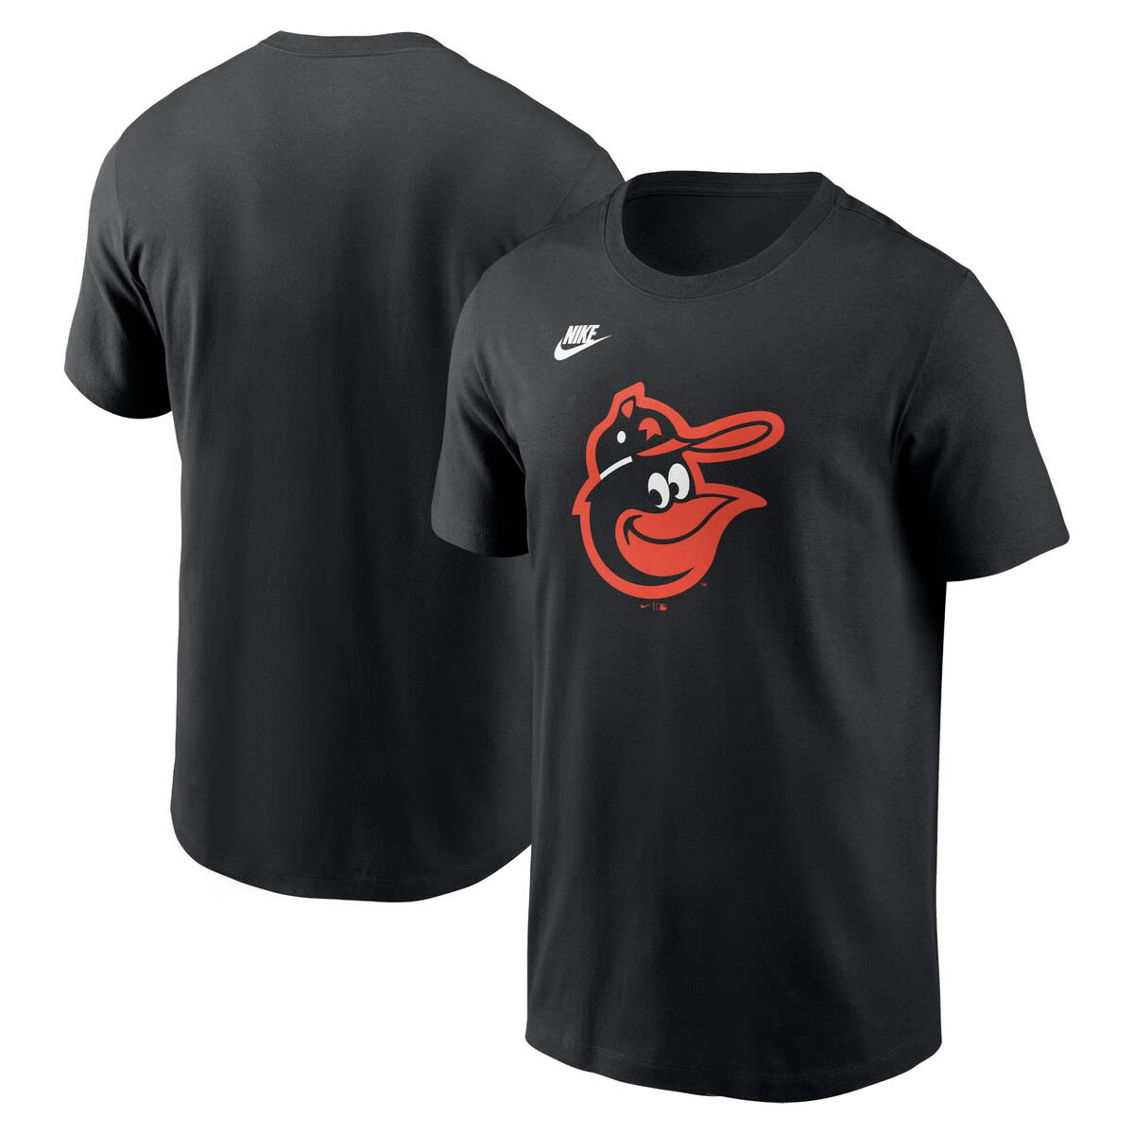 Nike Men's Black Baltimore Orioles Cooperstown Collection Team Logo T-Shirt - Image 2 of 4